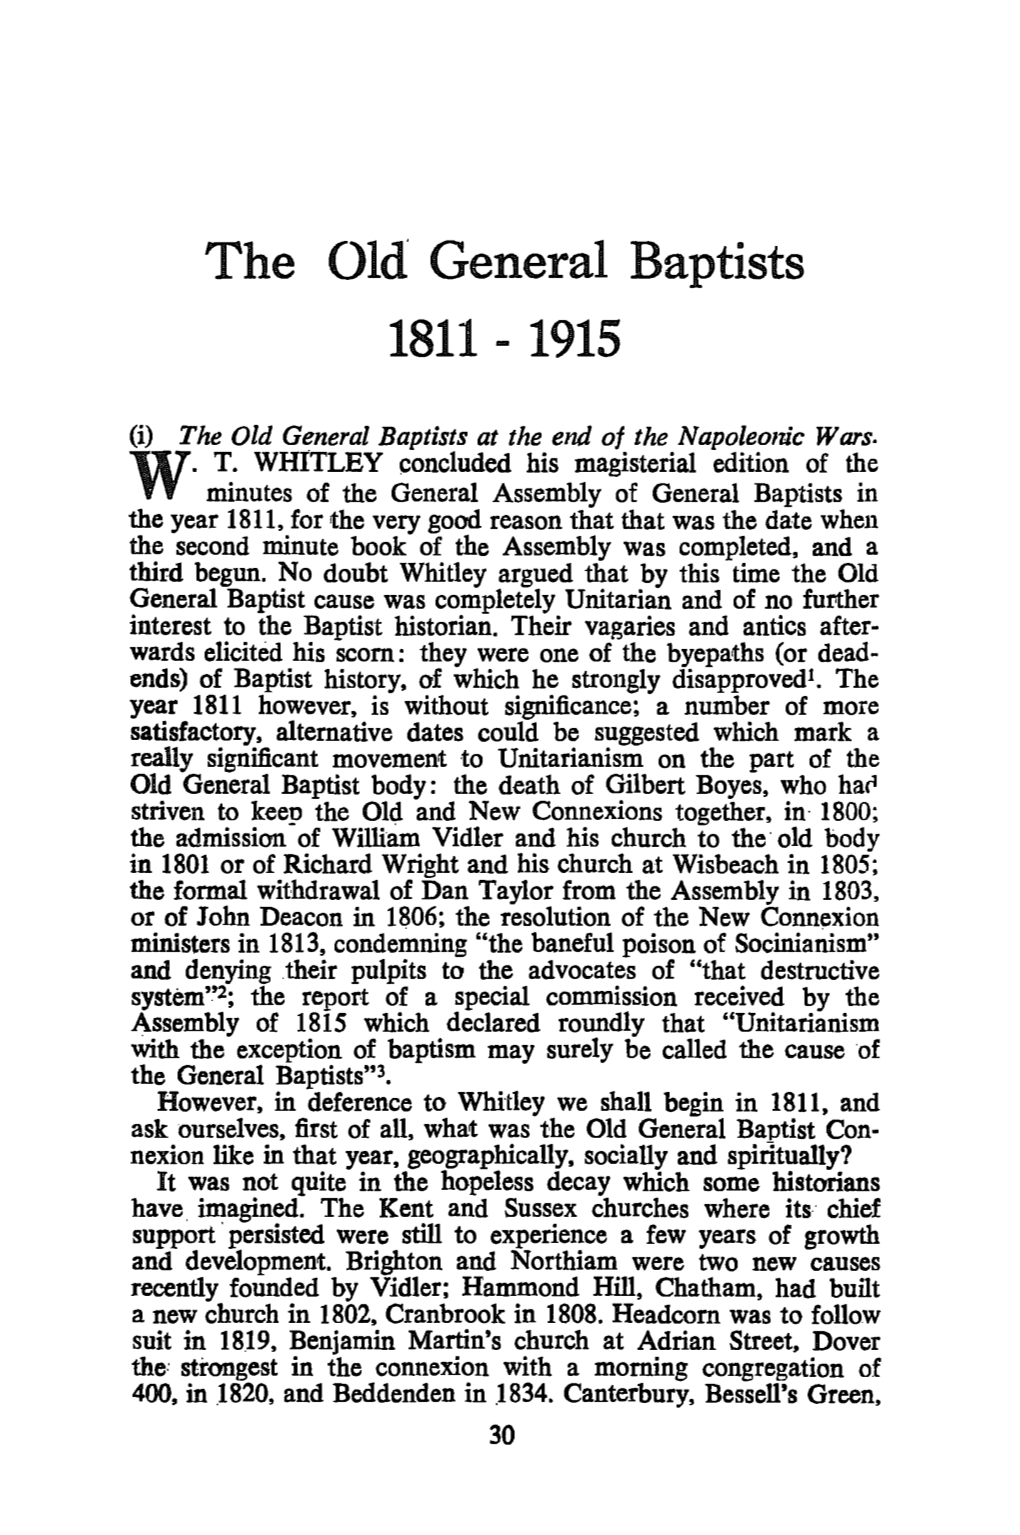 The Old General Baptists, 1811-1915 31